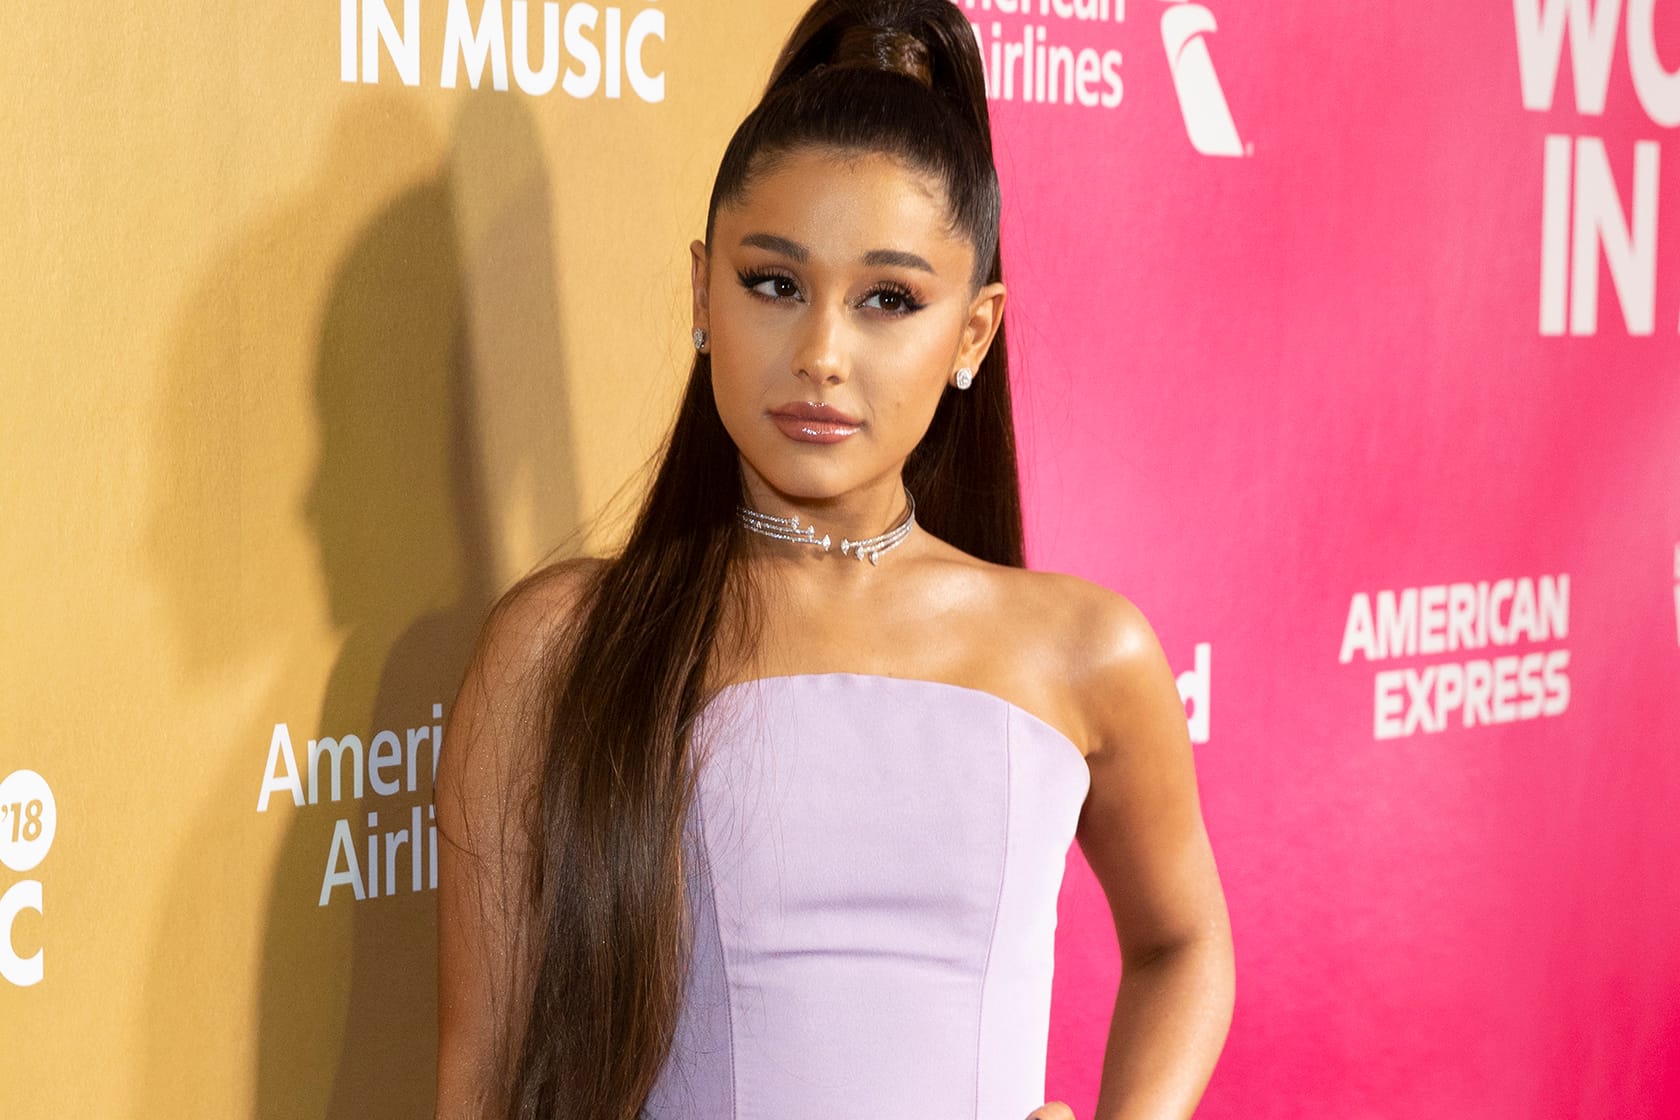 Ariana Grande Has Responded After Facing Backlash for '7 Rings'